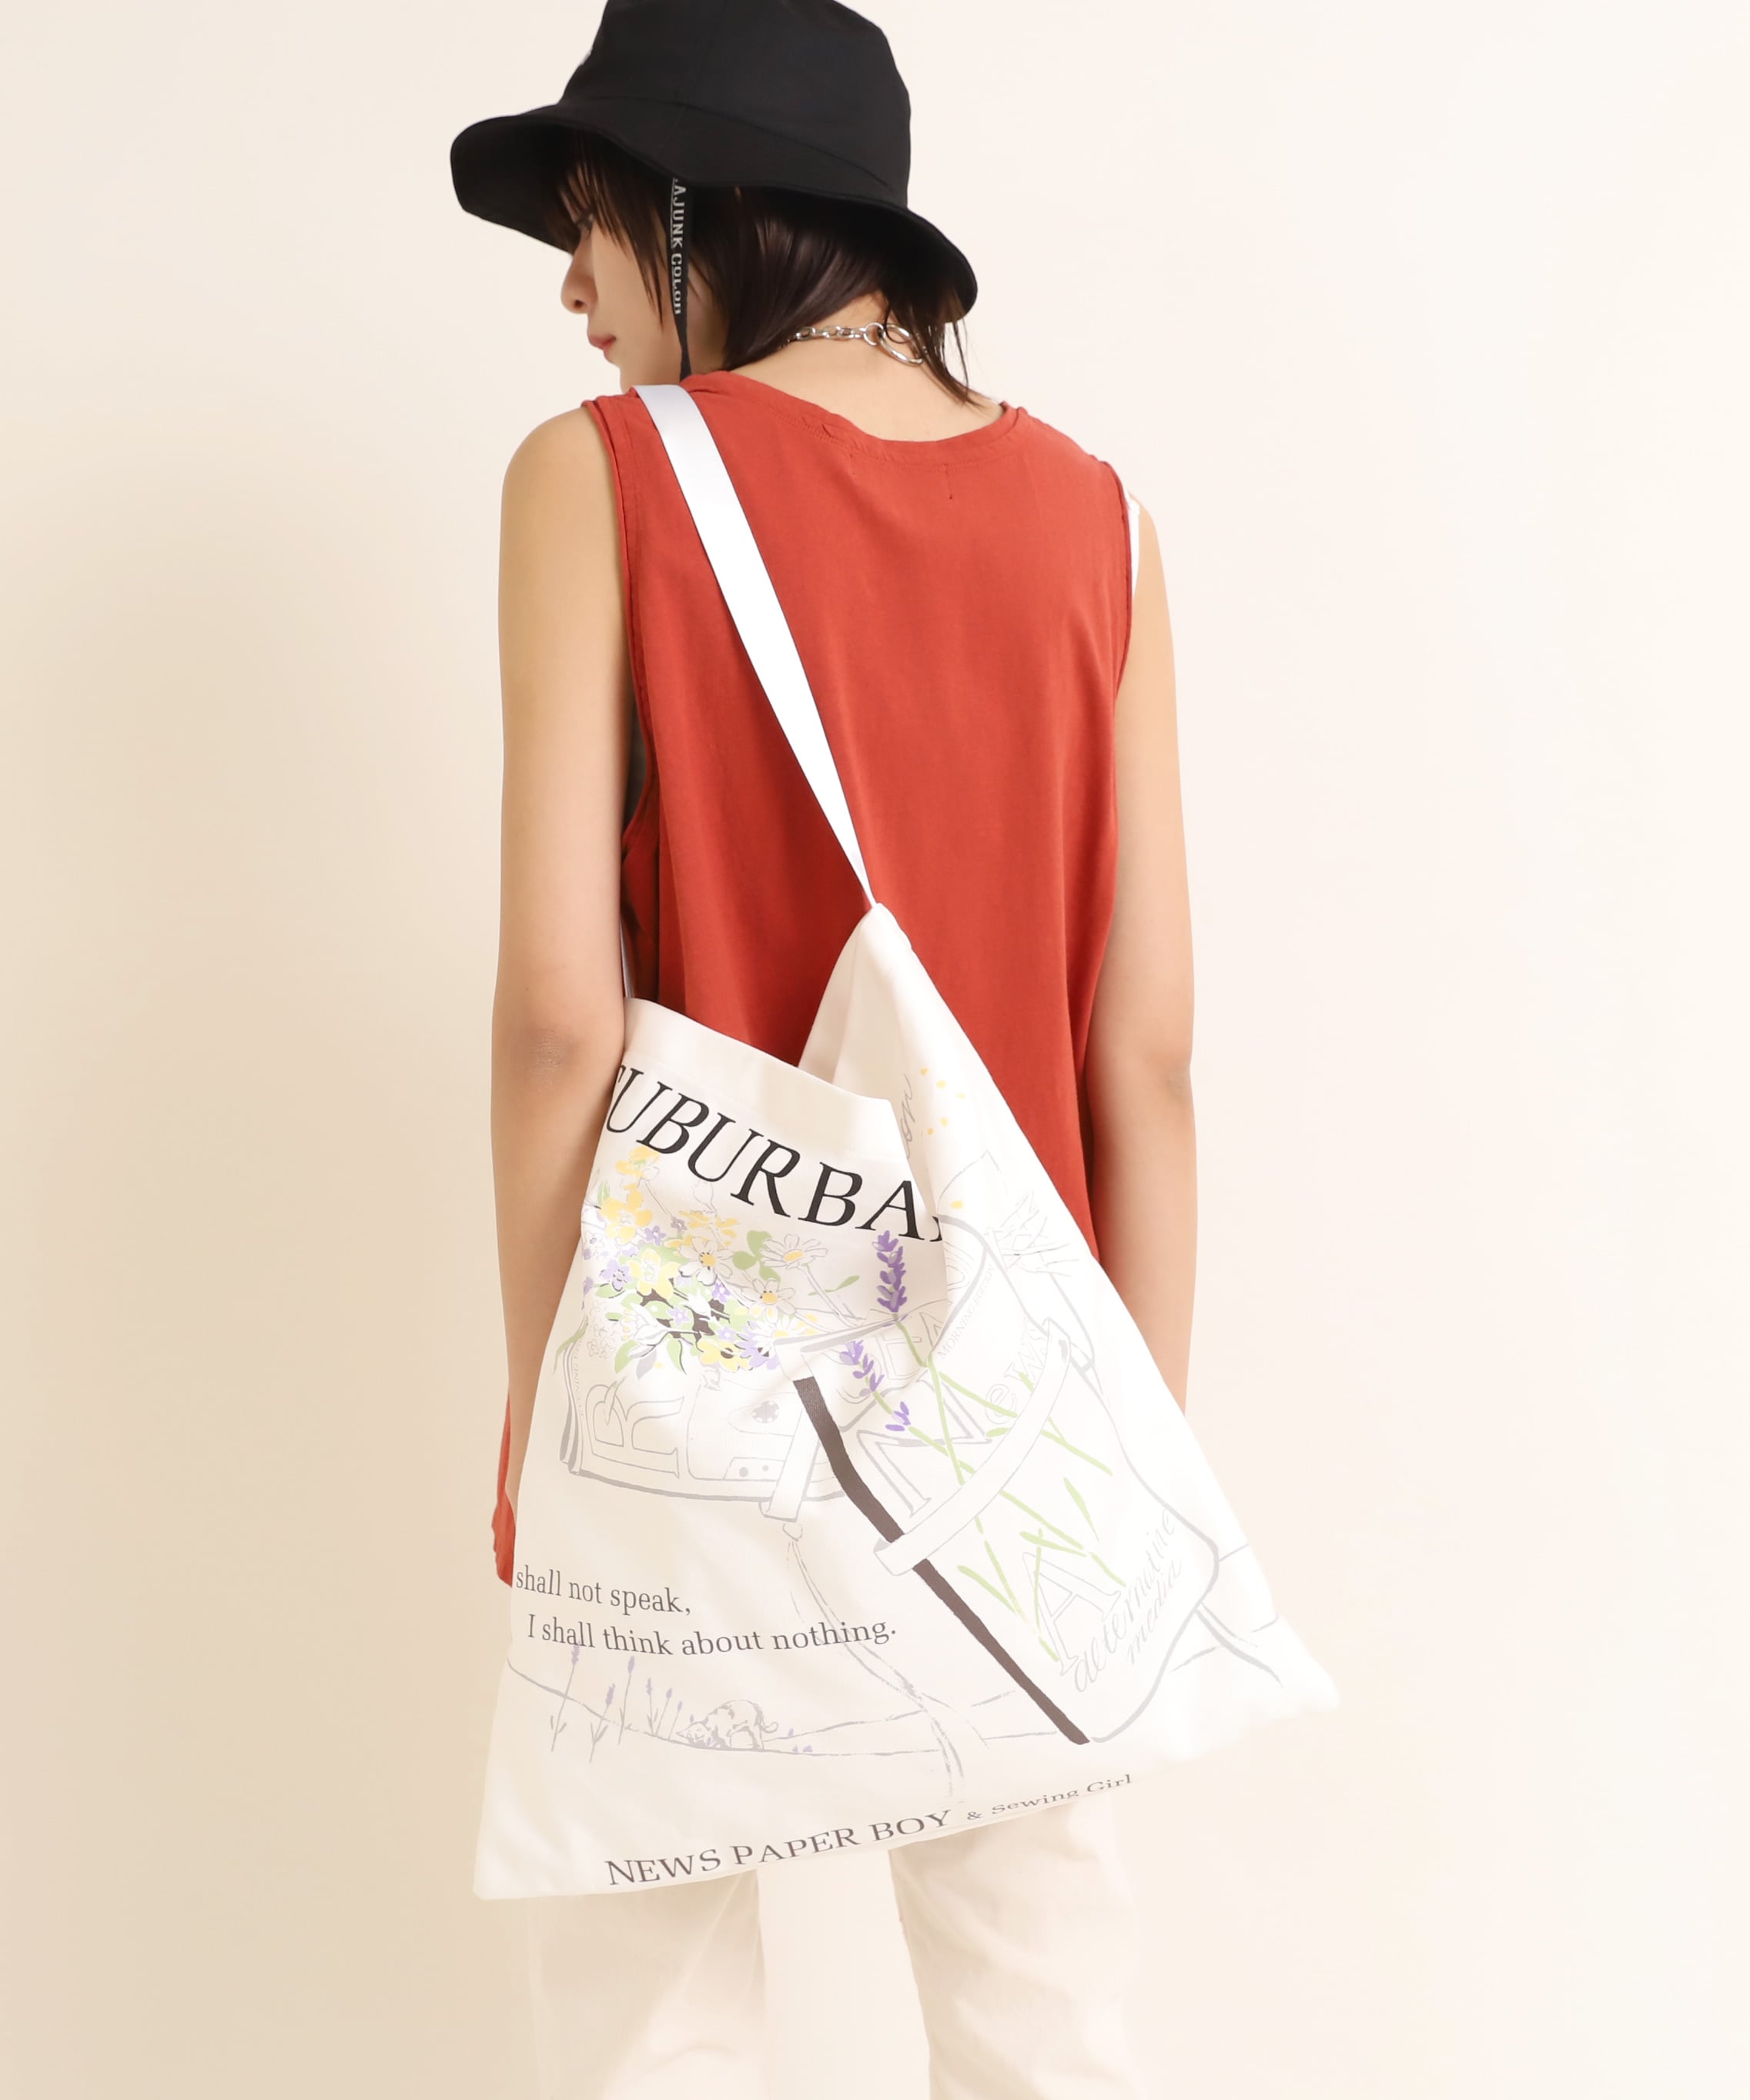 E4793 Work up! NewsPaper Bag(F ラベンダー柄): バッグ - RNA ONLINE 